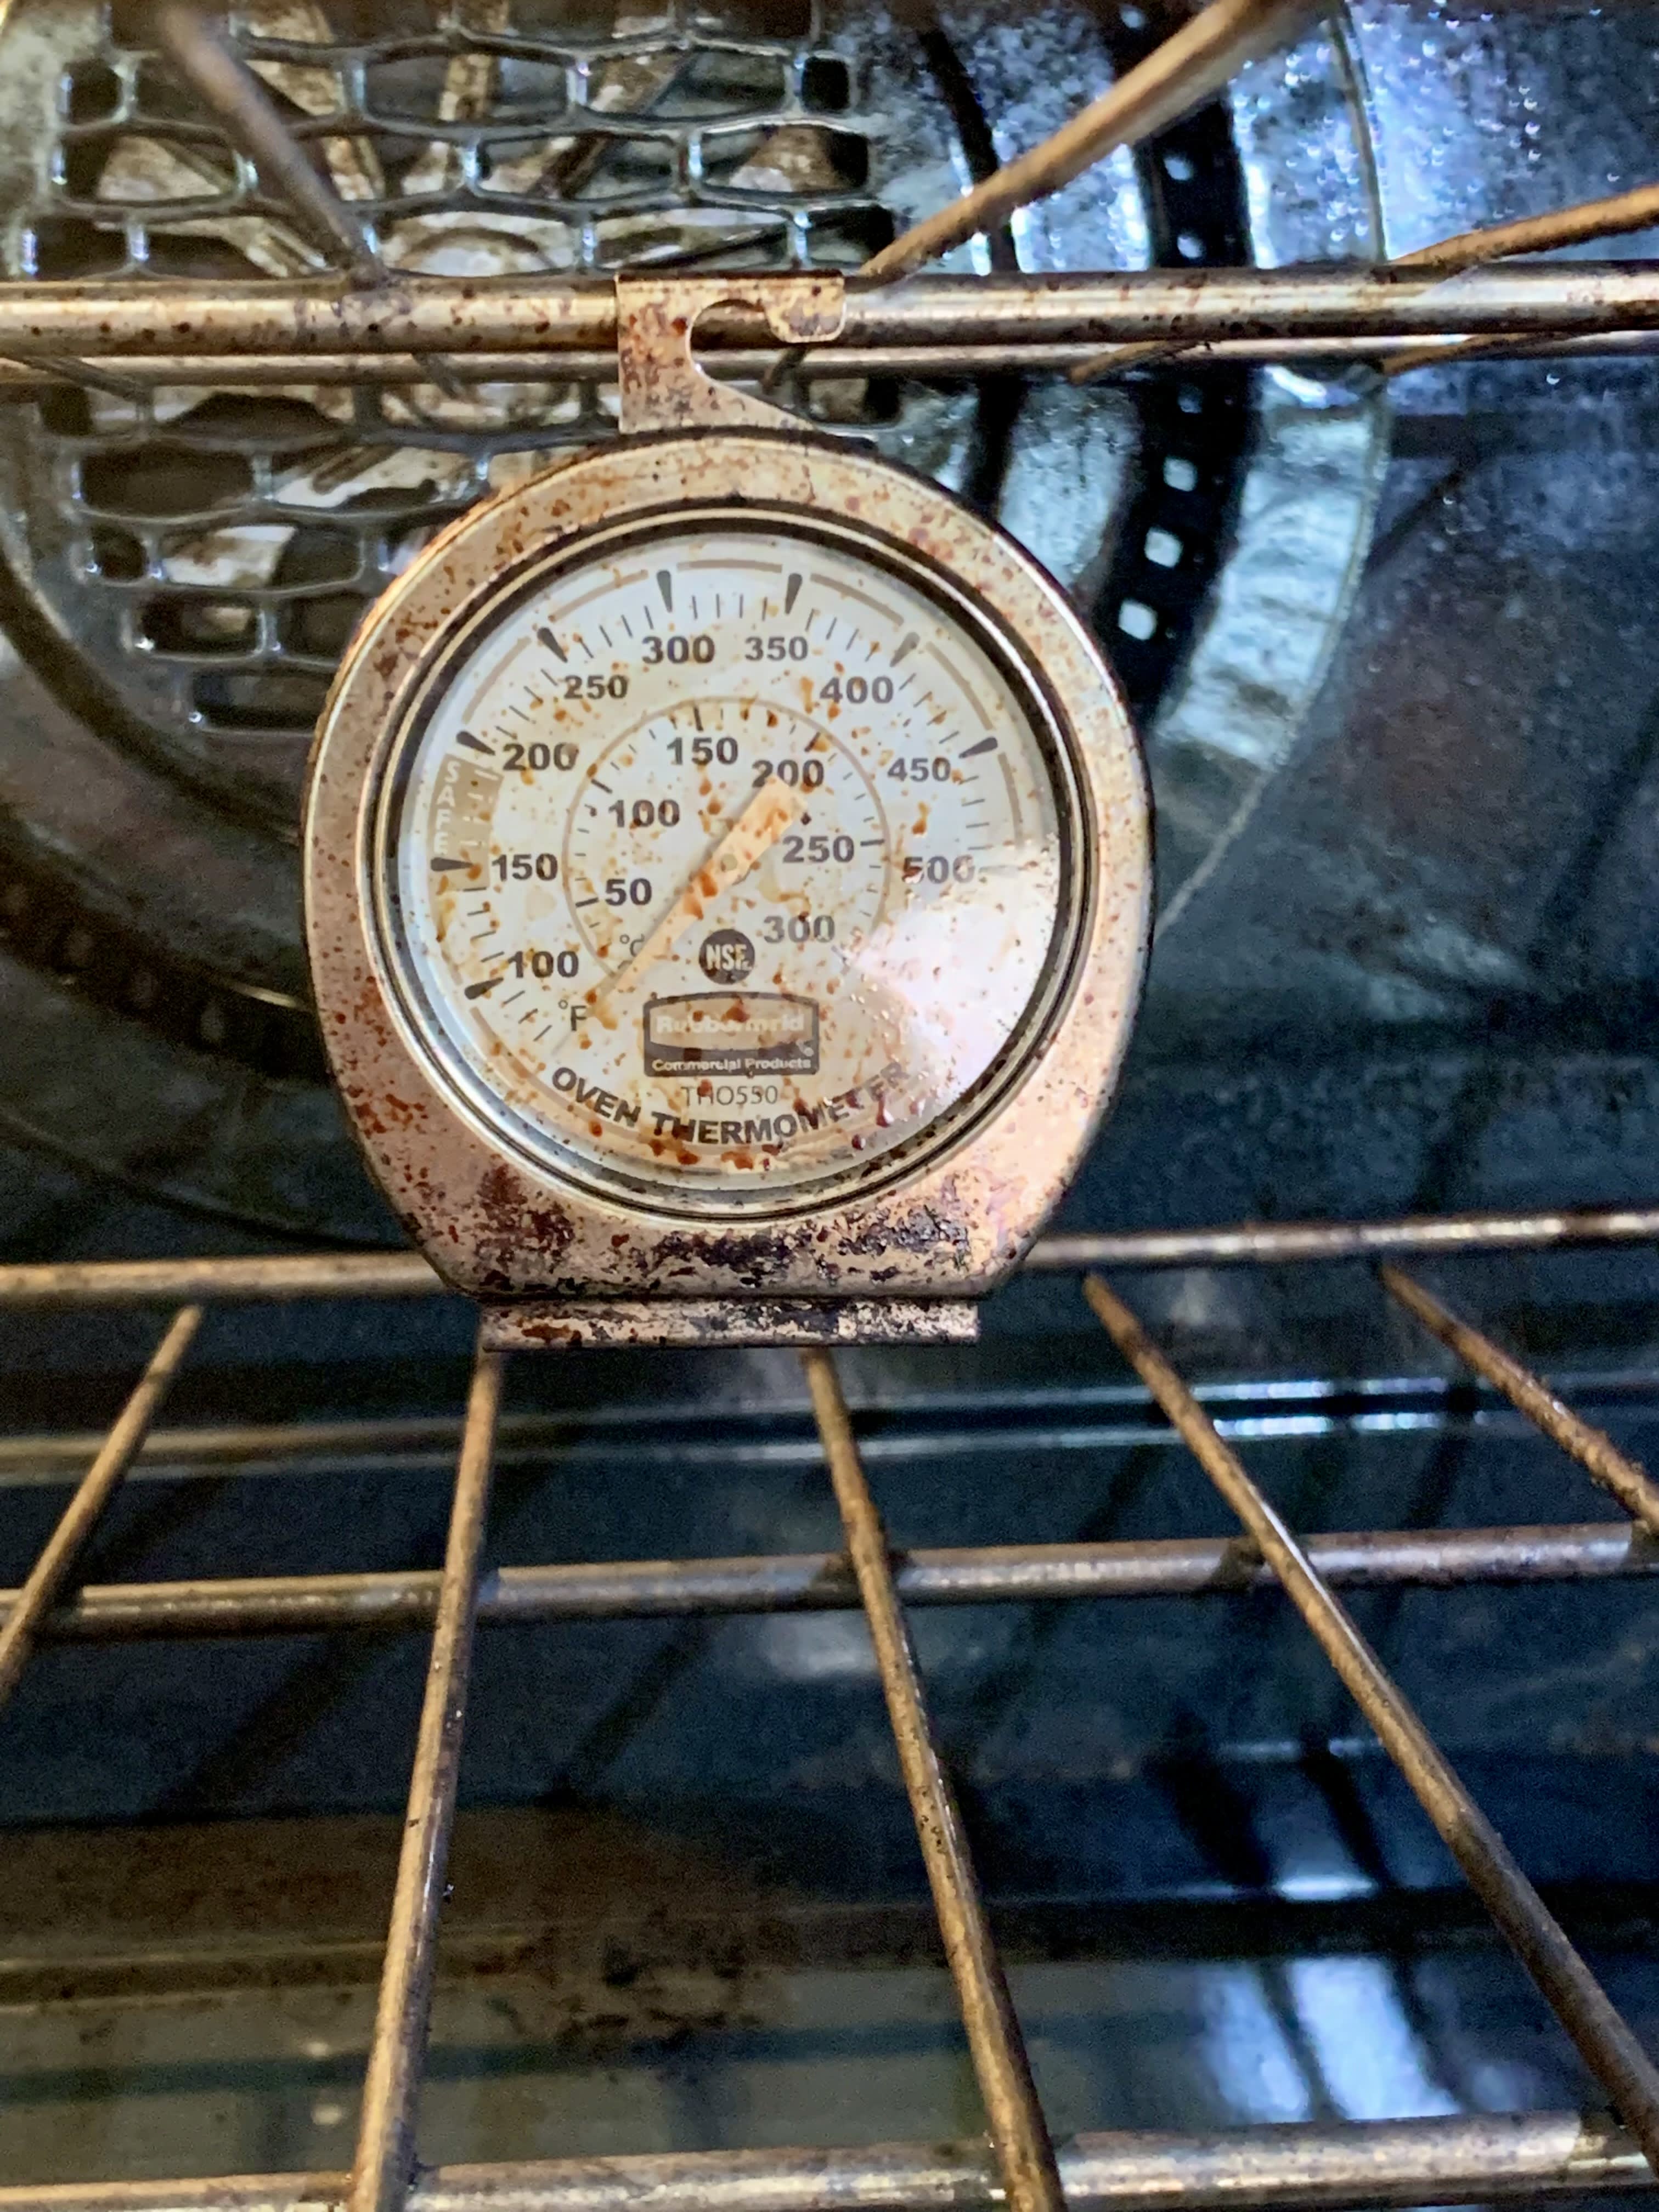 https://cdn.apartmenttherapy.info/image/upload/v1642455660/k/Edit/2022-03-Rubbermaid-Oven-Thermometer-Love-Letter/hanging_out.jpg